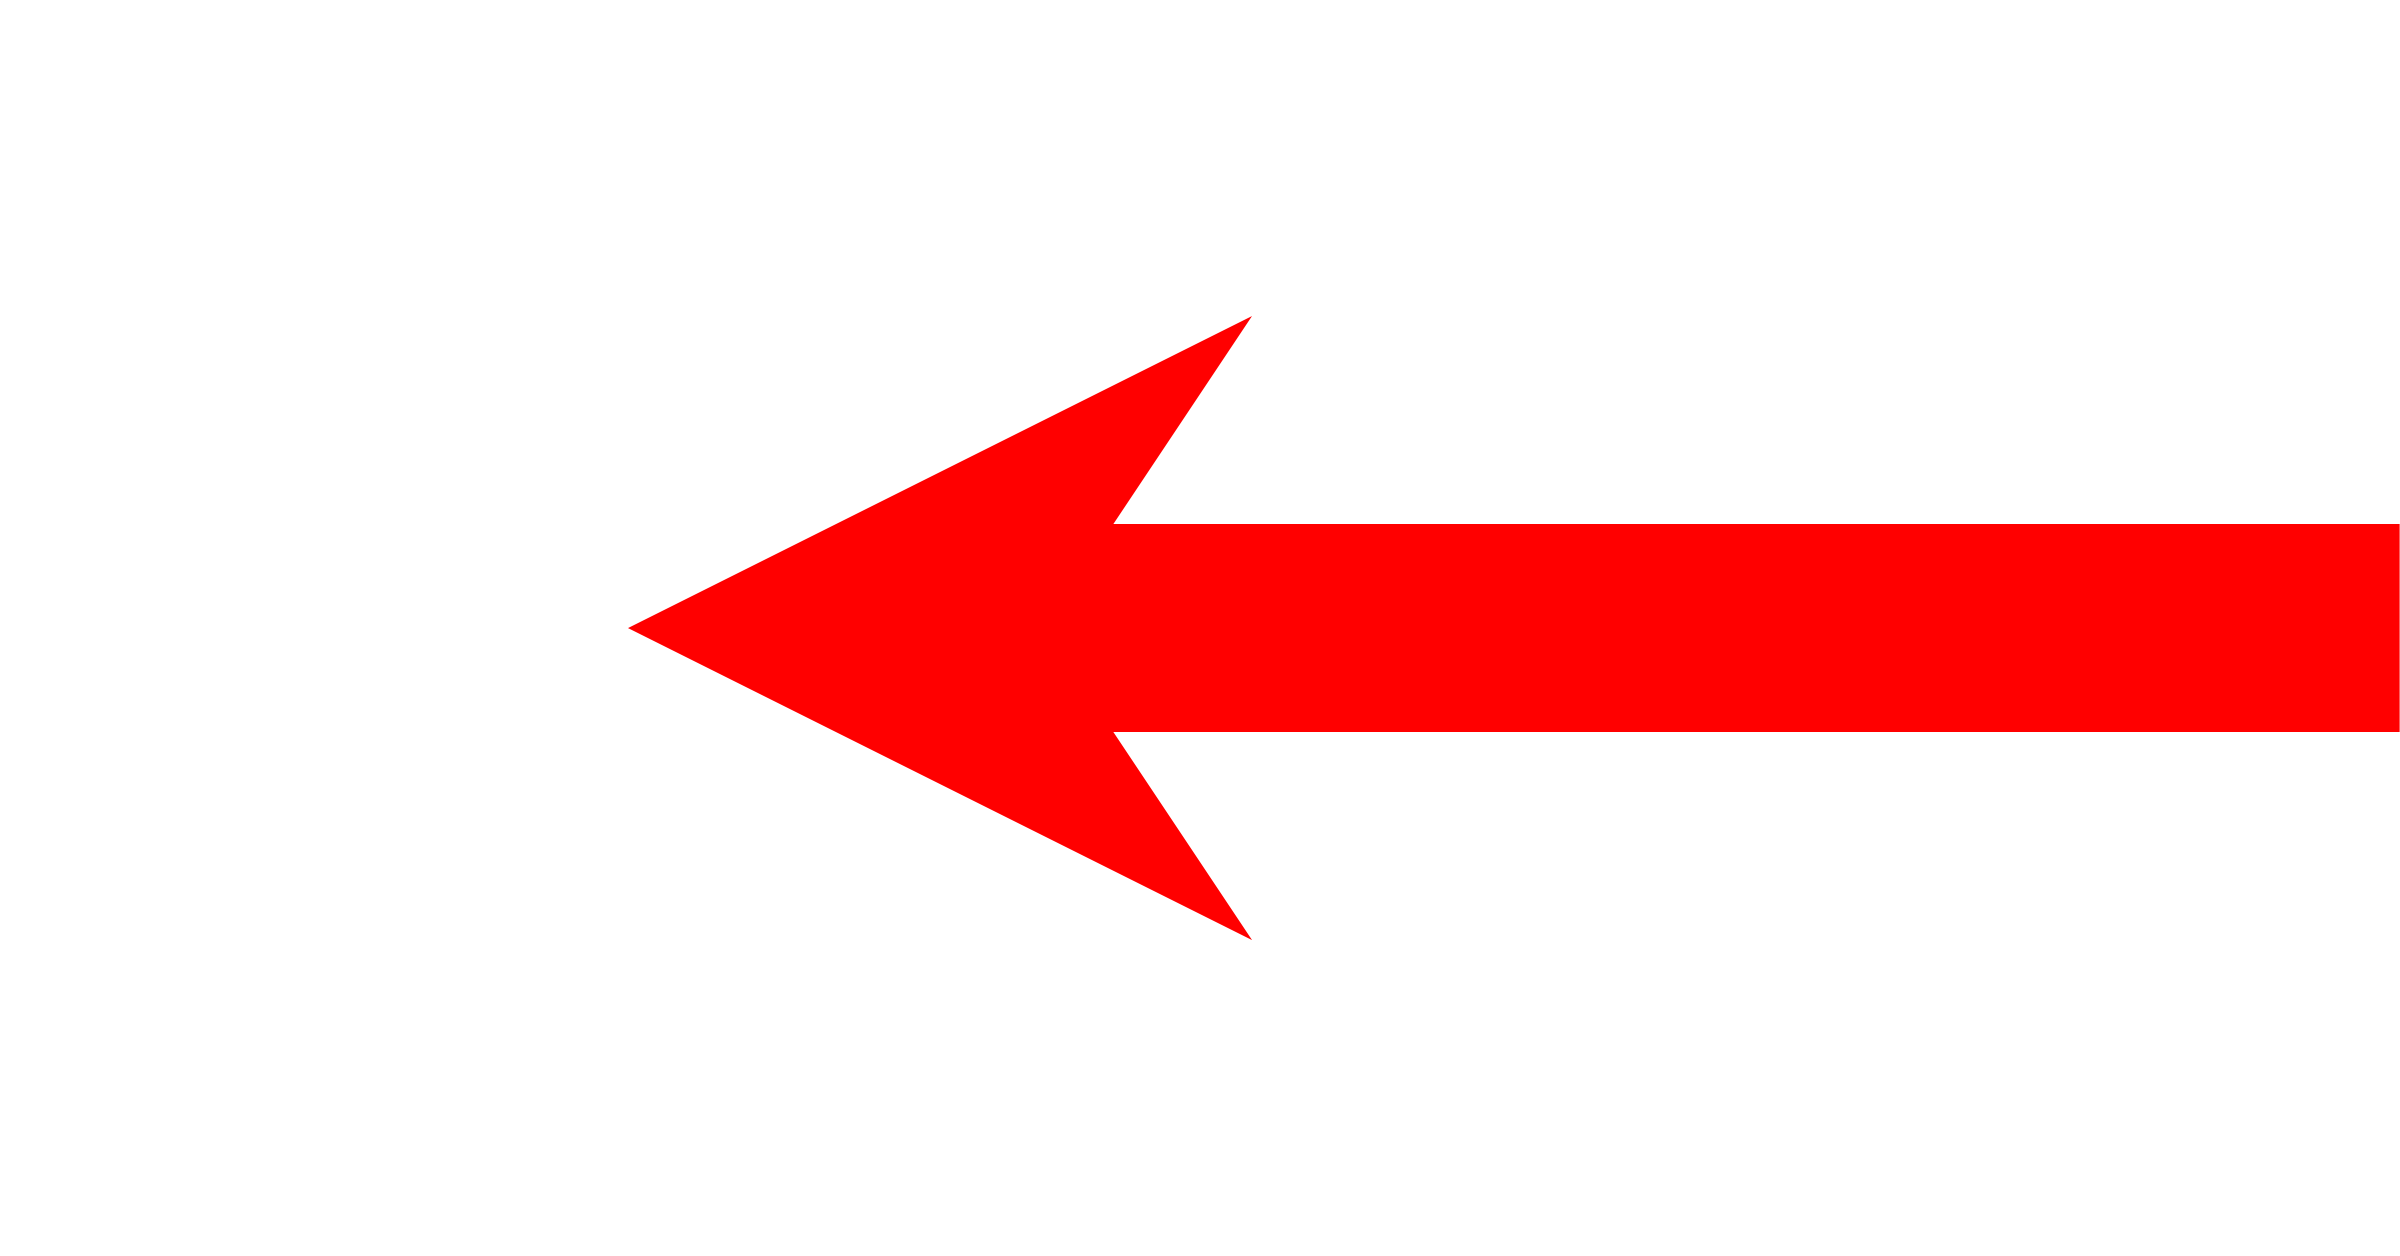 Red Arrow Logo - PNG Red Arrow Transparent Red Arrow.PNG Images. | PlusPNG